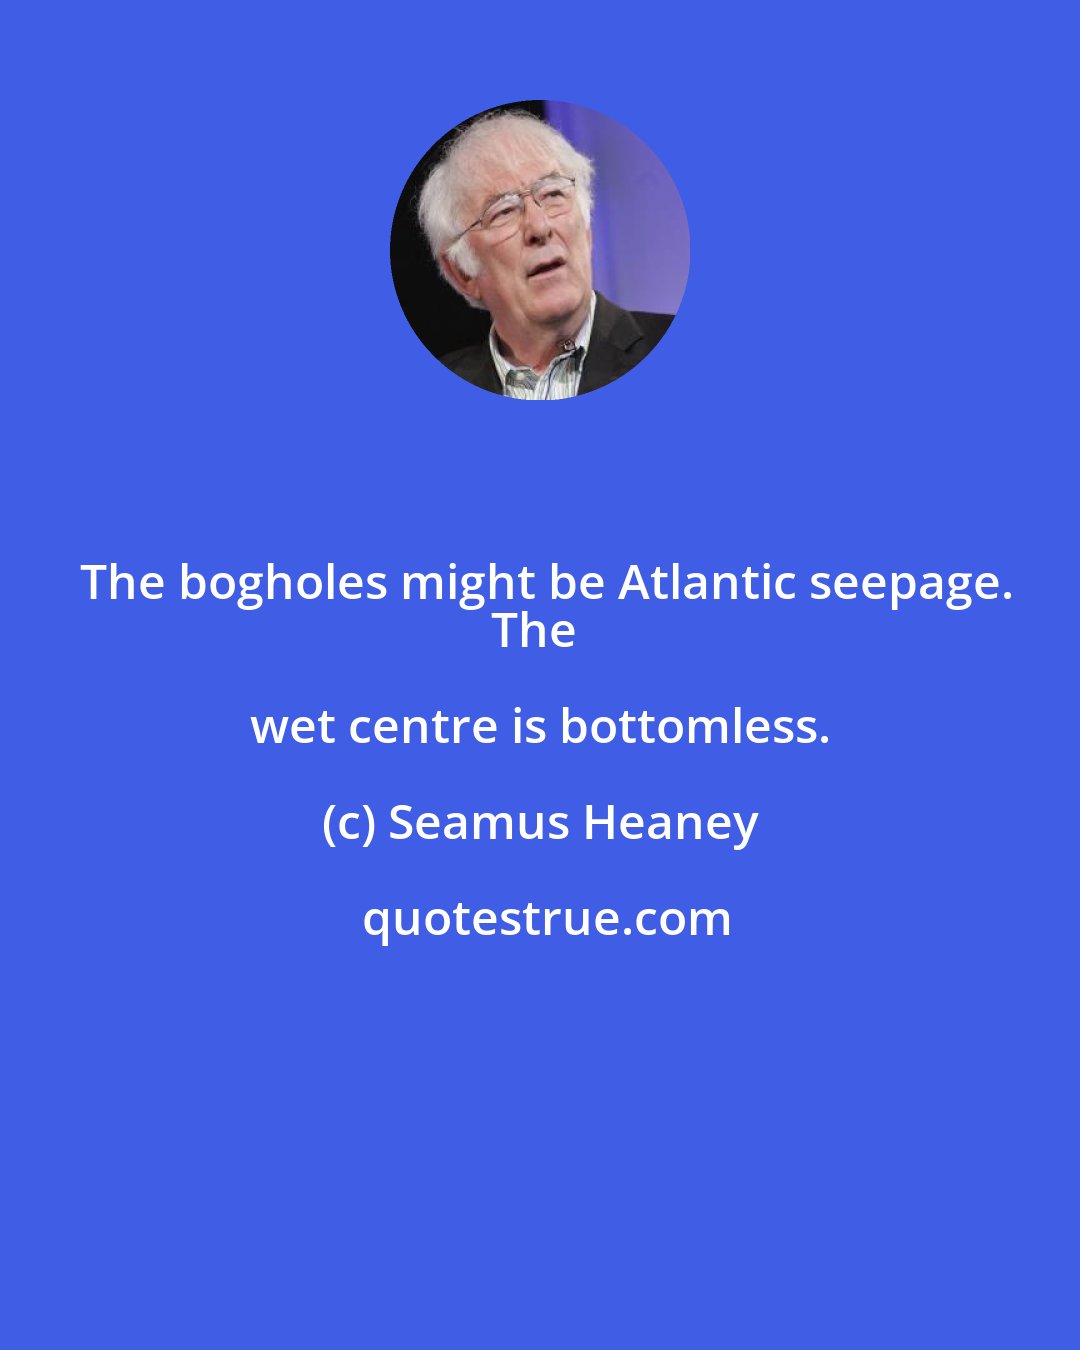 Seamus Heaney: The bogholes might be Atlantic seepage.
The wet centre is bottomless.